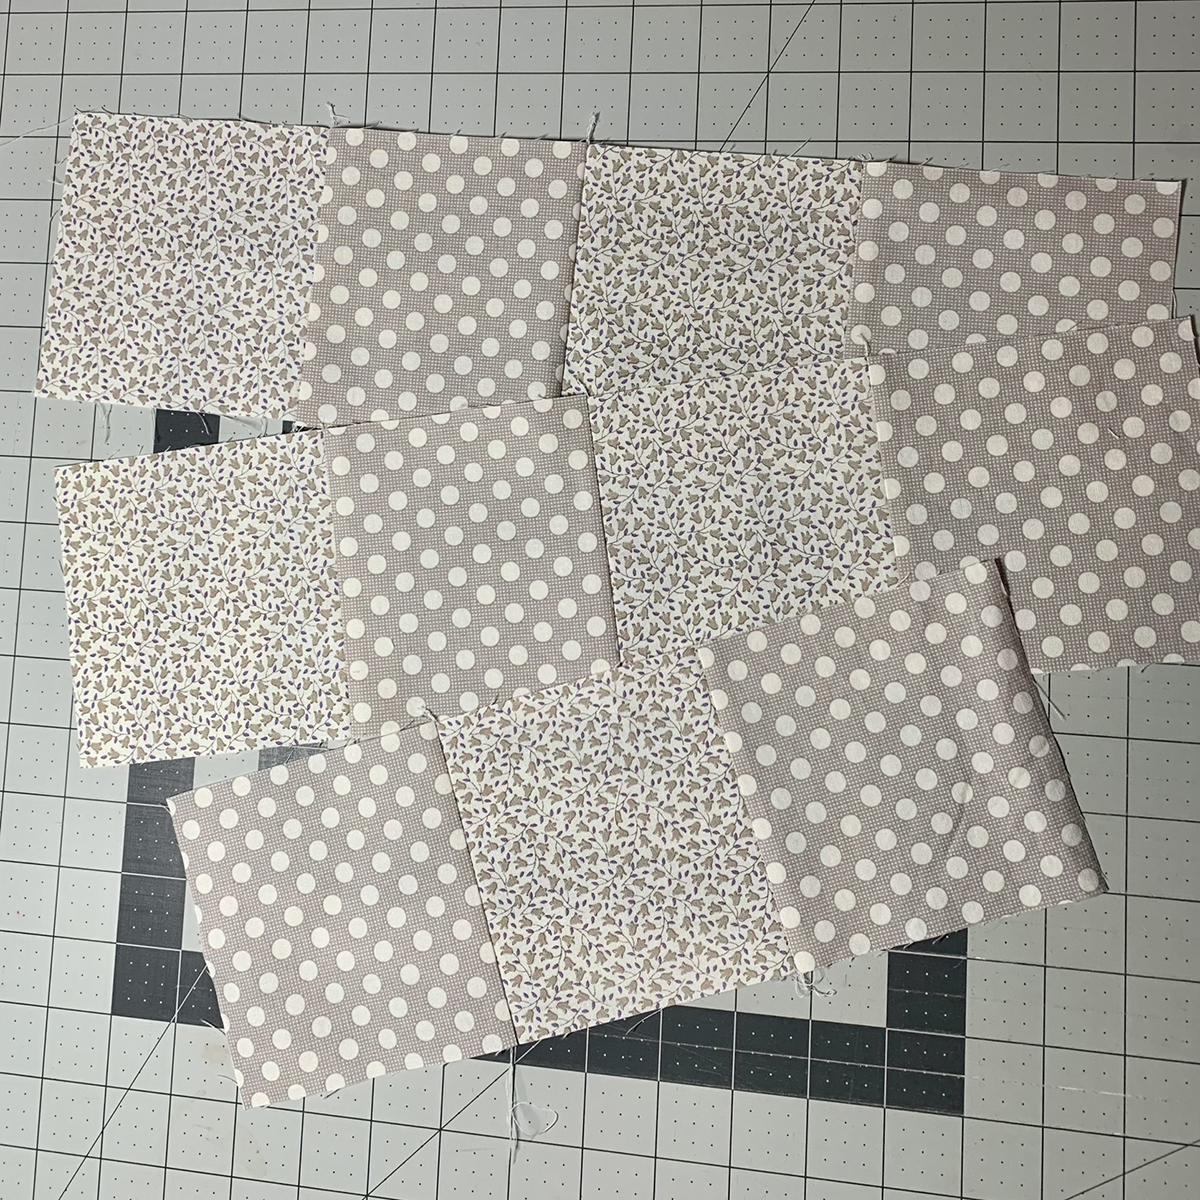 Serger_Baby_Quilt_#1_Post_23_pairs_stitched_to_pairs_BERNINA_WeAllSew_Blog_1200x1200px